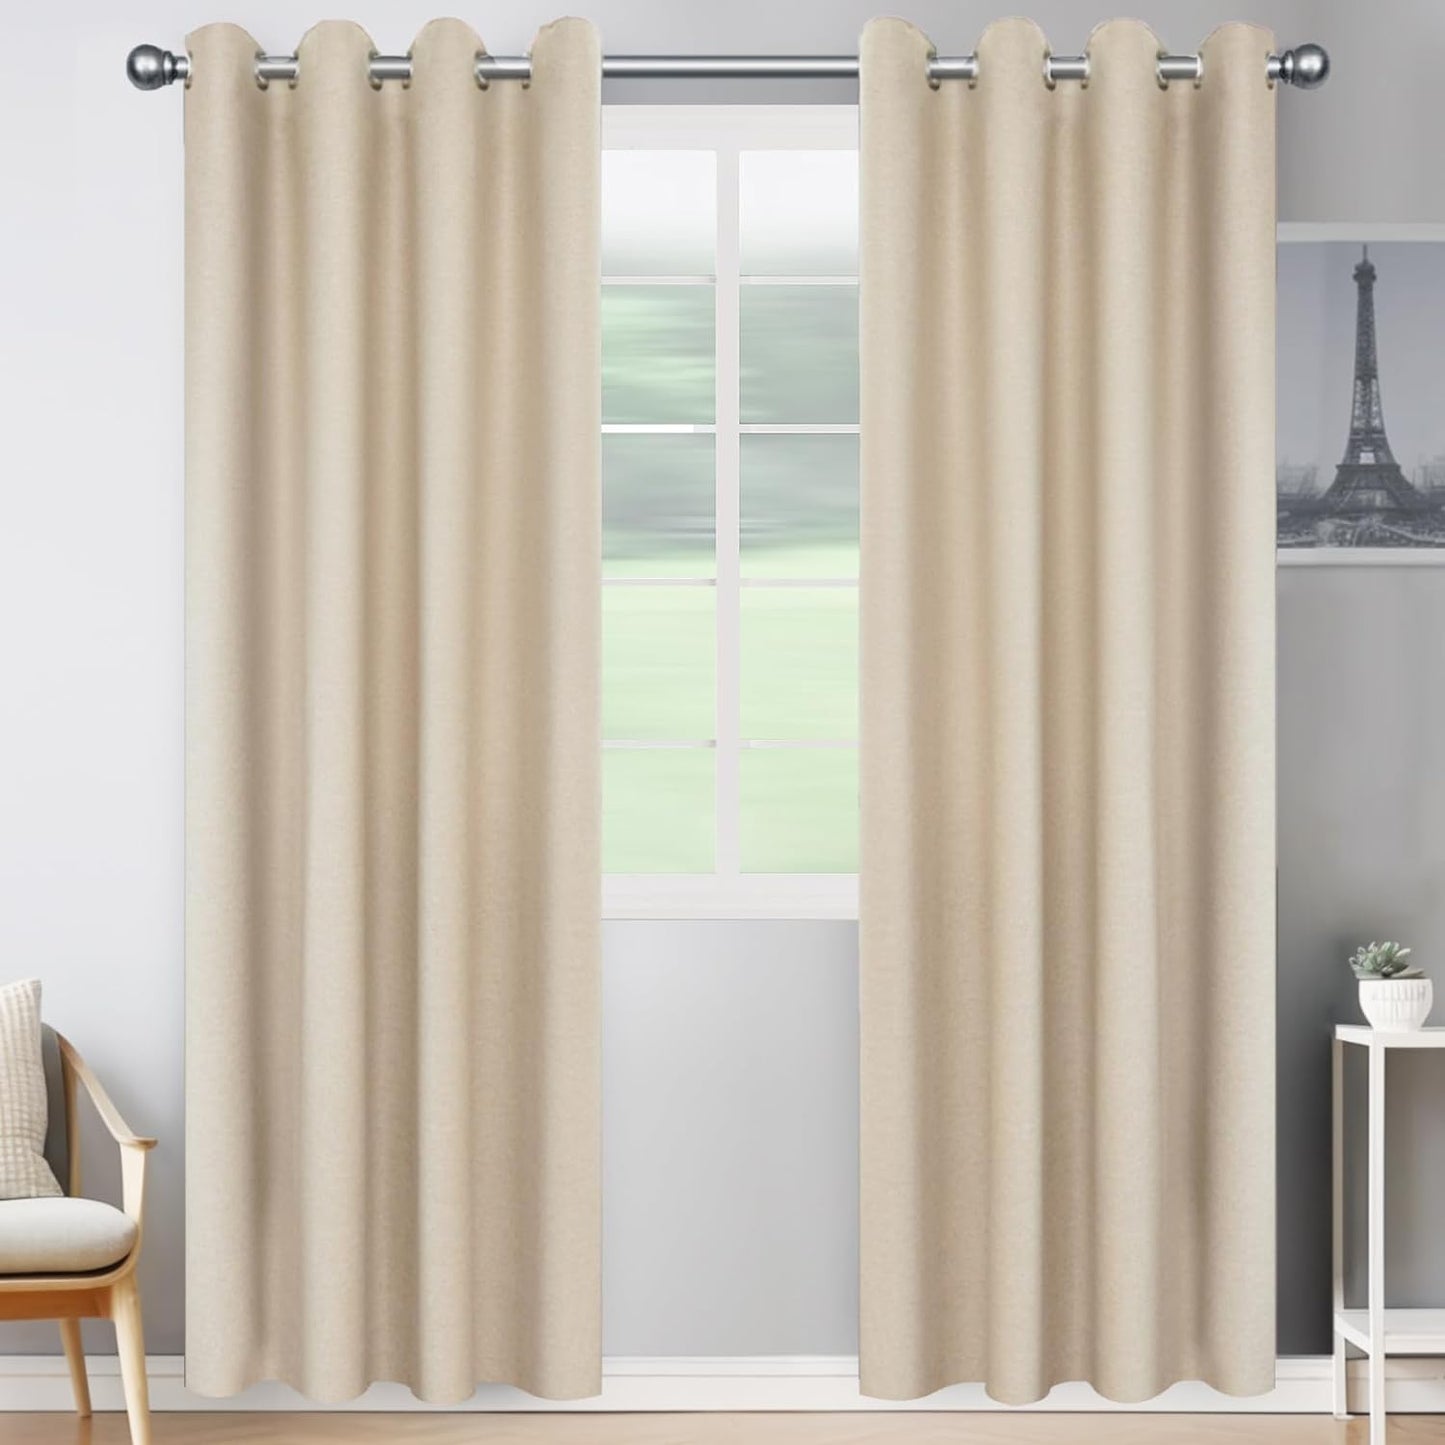 JIVINER Blackout Curtains 84 Inches Long Soundproof Thermal Insulated Curtains/Drapes/Panels for Kid'S Room (Baby Pink, W42 X L84,2 Panels)  JWN E-Commerce Linen Beige W52 X L96 ,2 Panels 